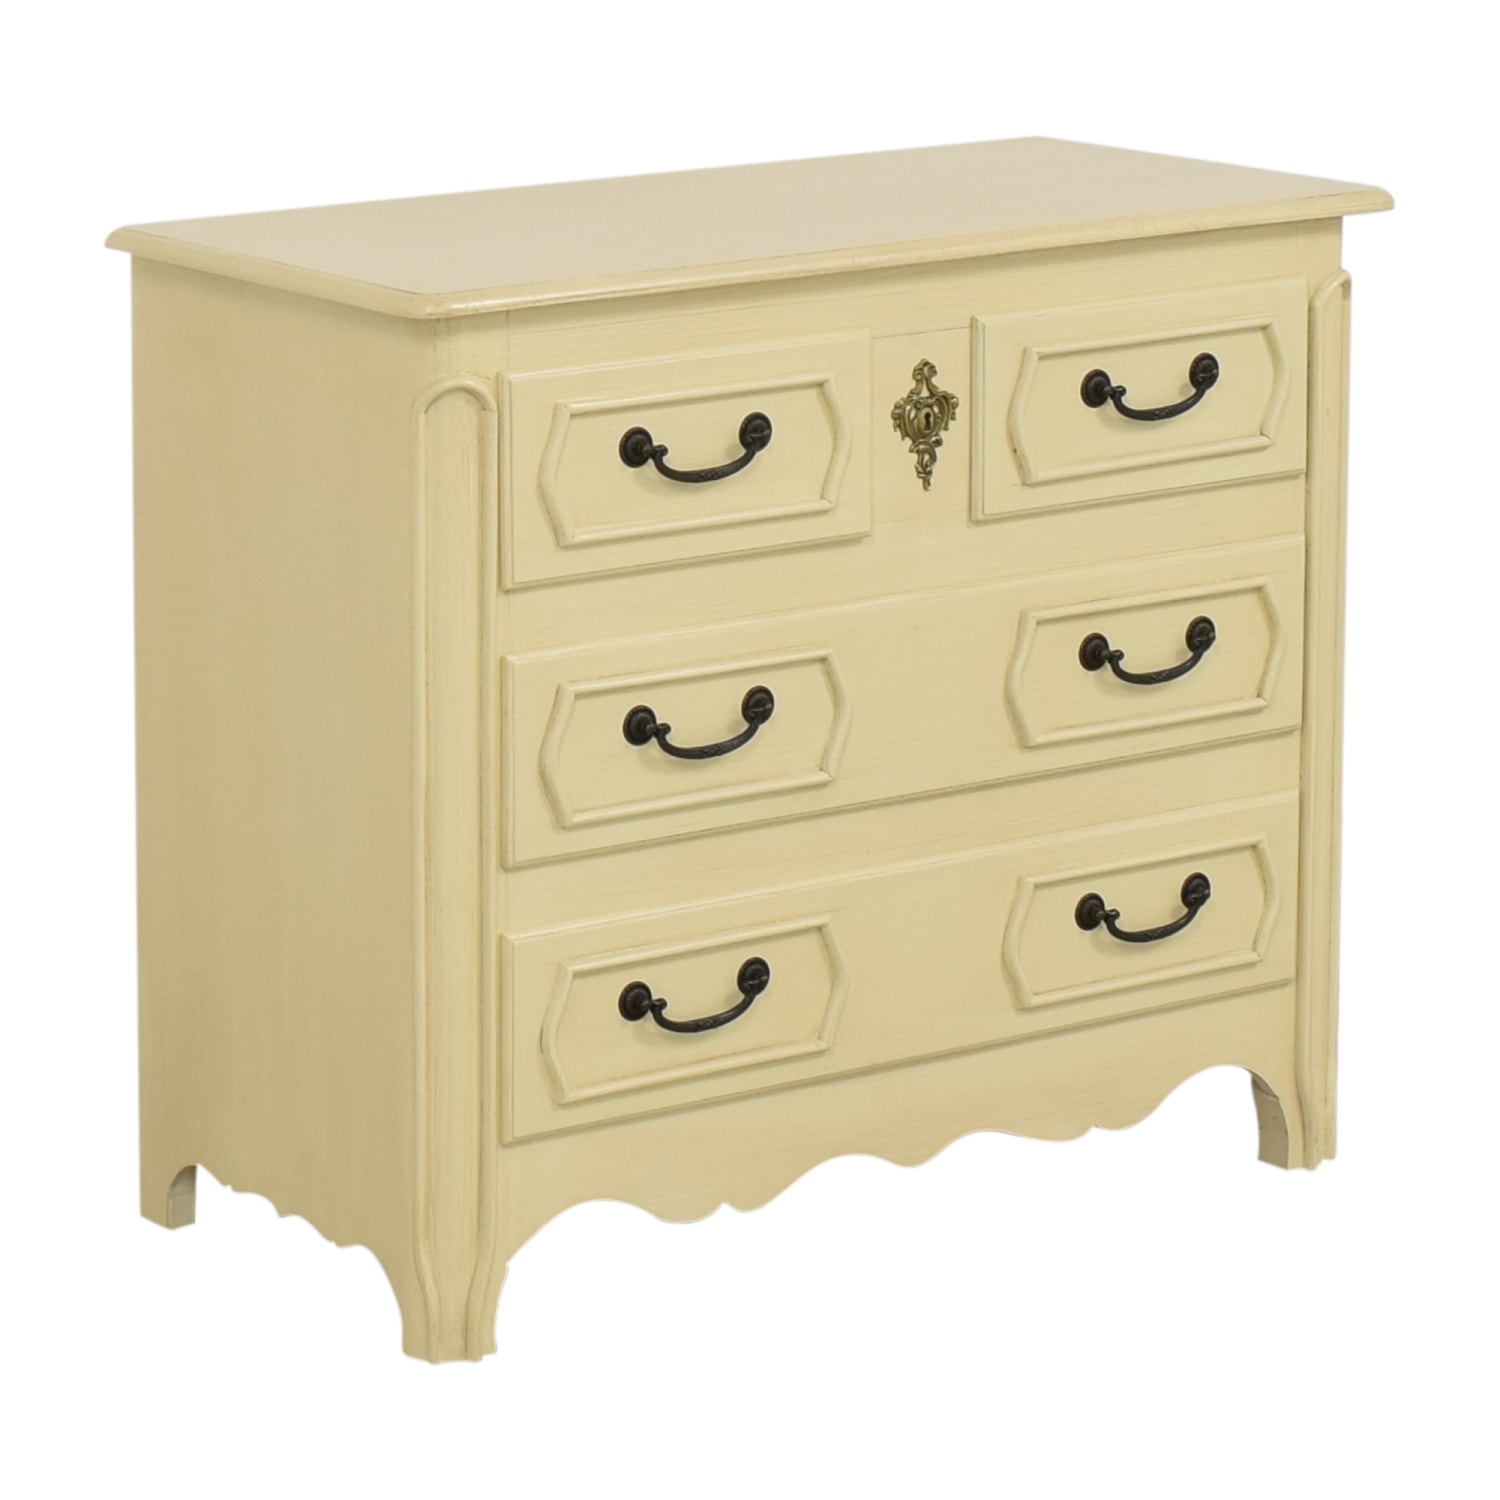 British Traditions British Traditions Four Drawer Dresser for sale